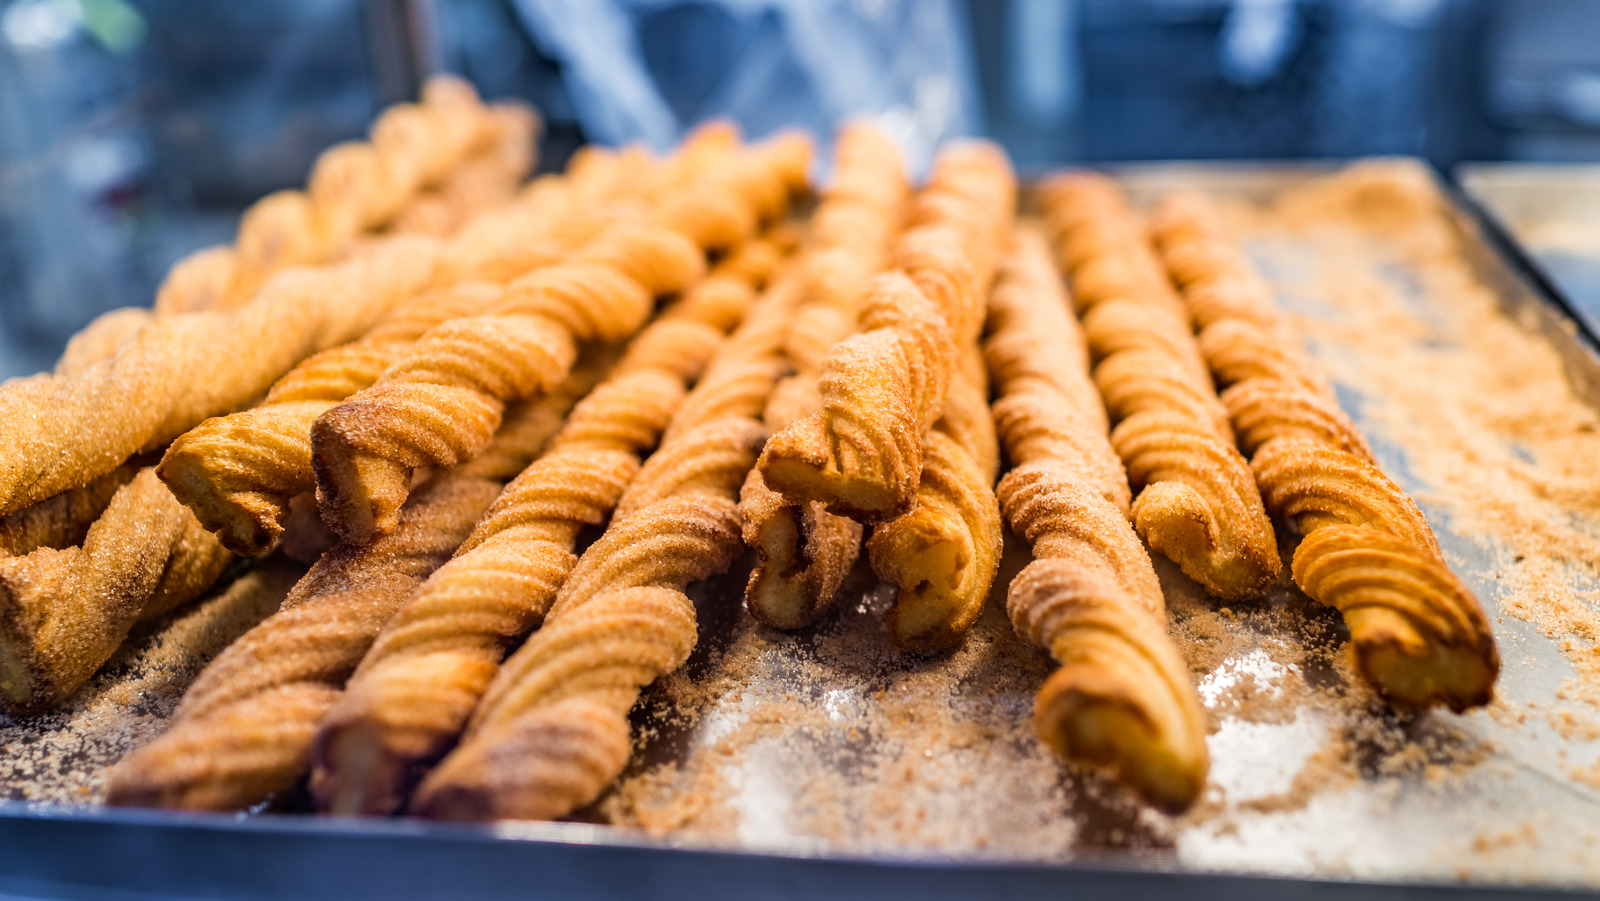 You Can Still Buy the Discontinued Churros at Costco's Food Court, But There's a Catch